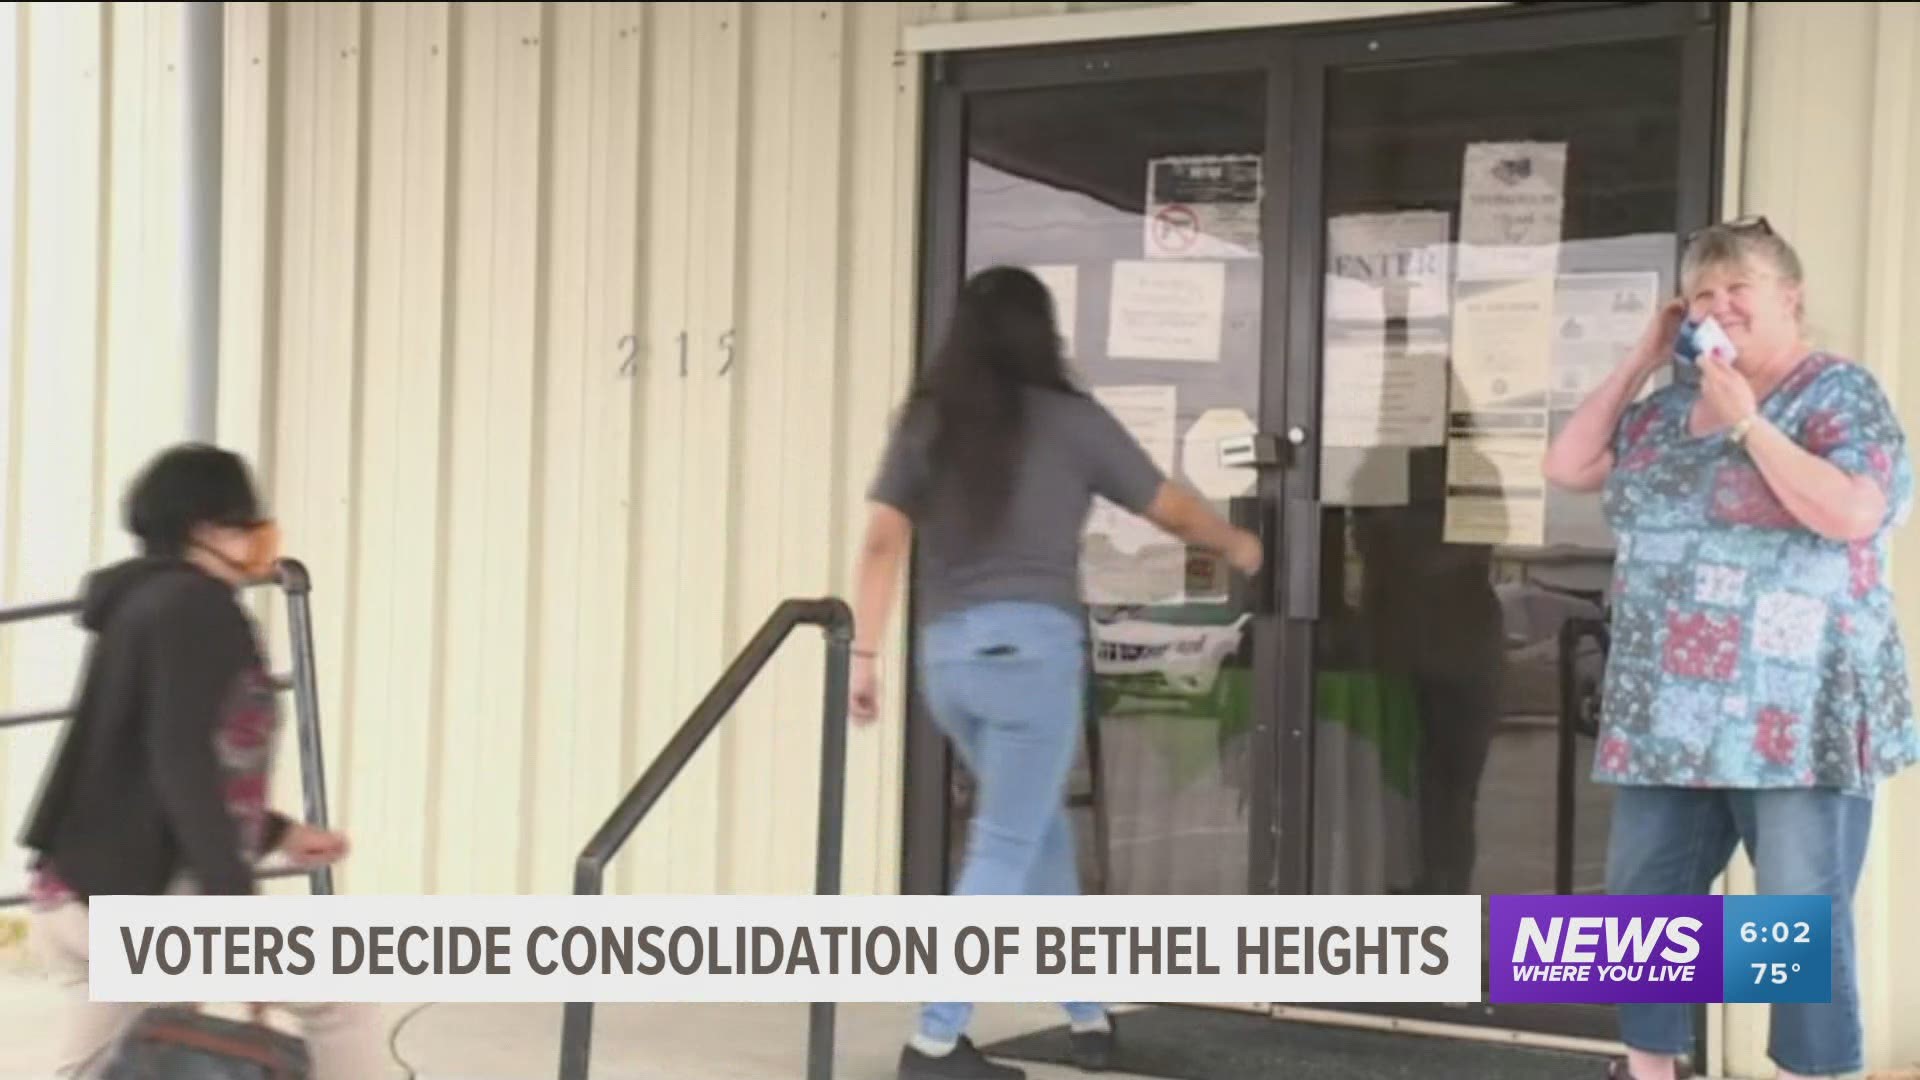 Voters to decide on the consolidation of Bethel Heights